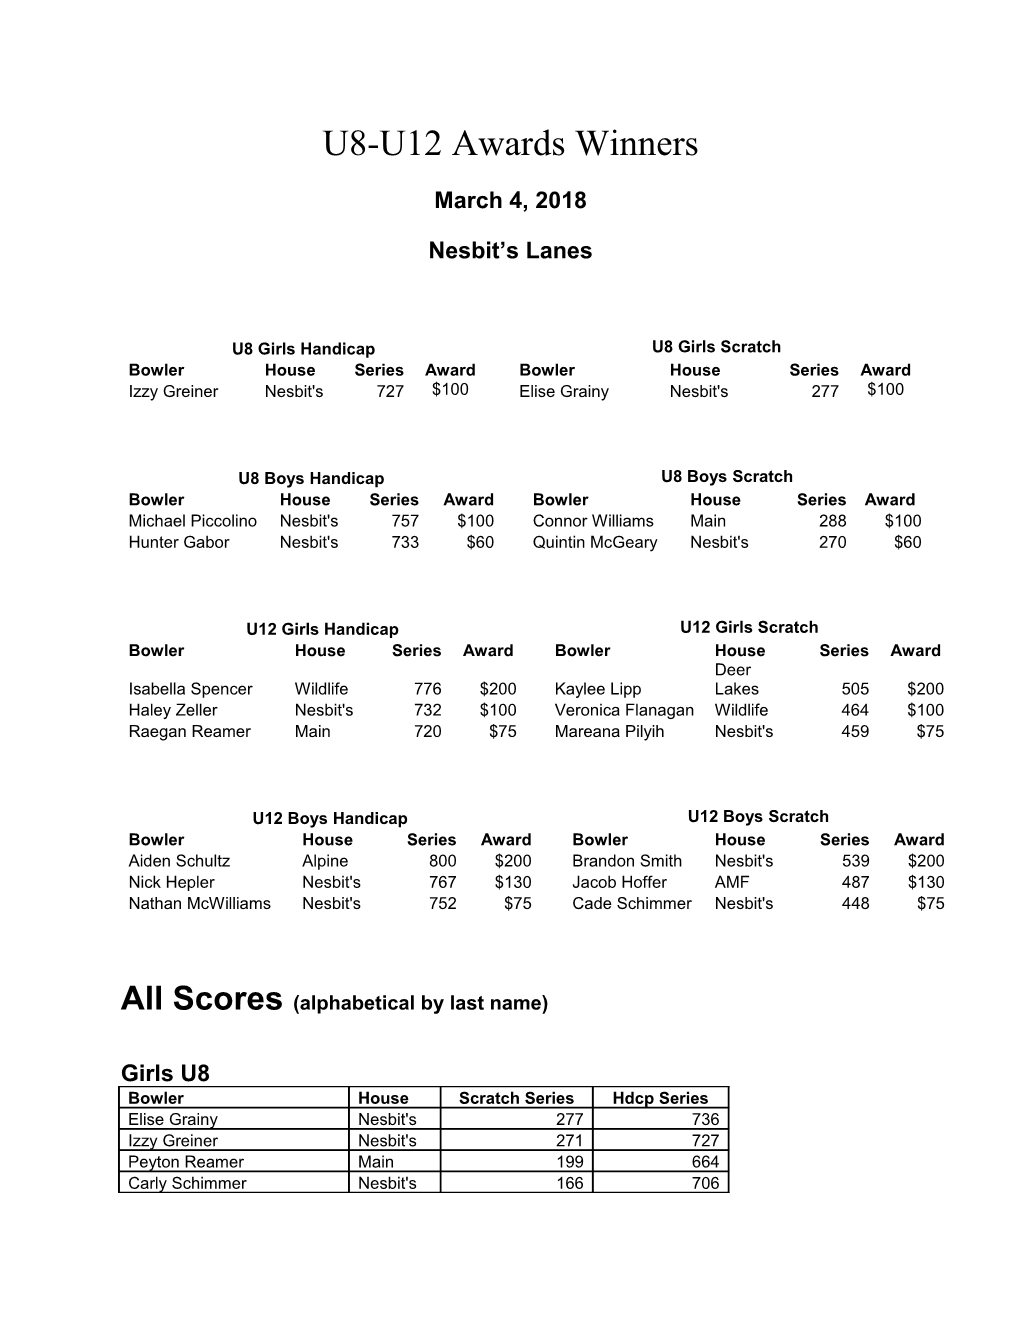 All Scores (Alphabetical by Last Name)